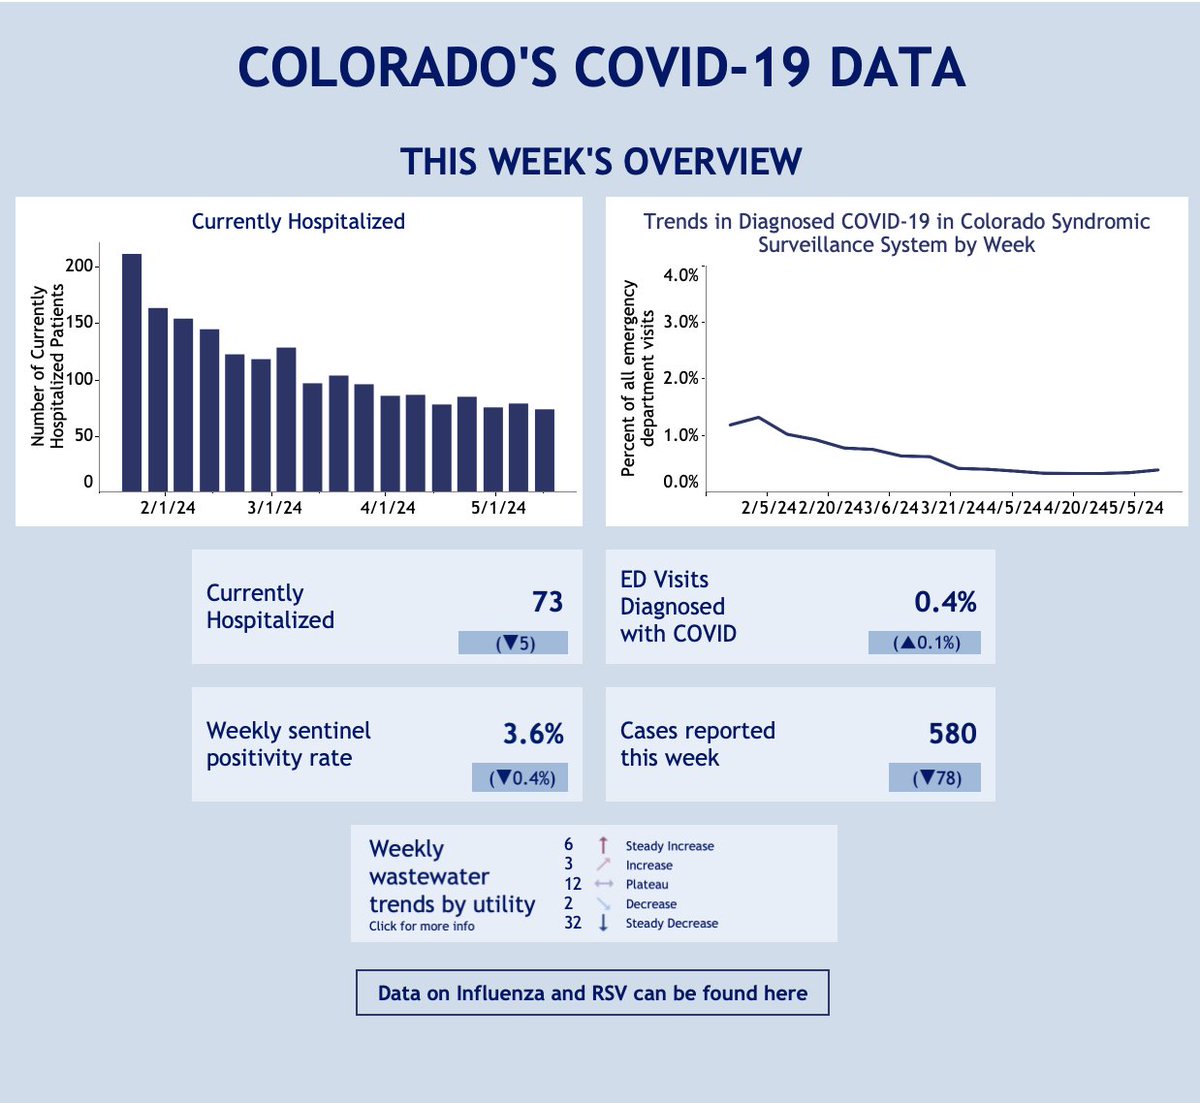 COVID in Colorado Weekly Update - 5/15/24

Reported Cases drops to 580 from 657, falling 12%.

Positivity drops to 3.6%.   

Covid patients dips to 73 from 78. 

Most indicators fall slightly after a slight rise last week, but remain low.